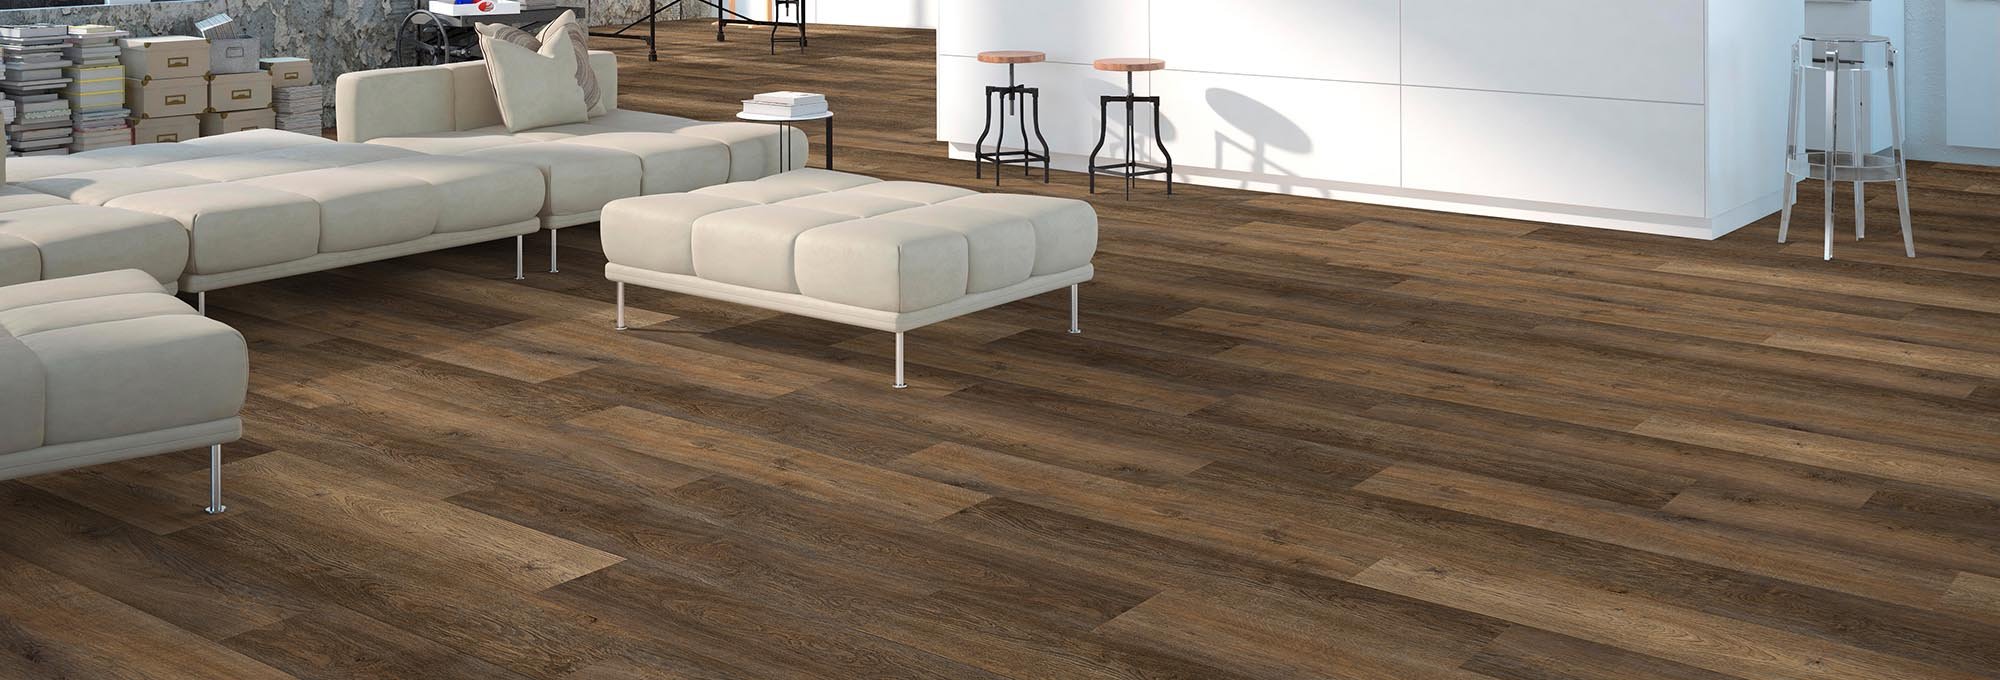 Shop Flooring Products from Pulskamps Flooring Plus in Batesville, IN